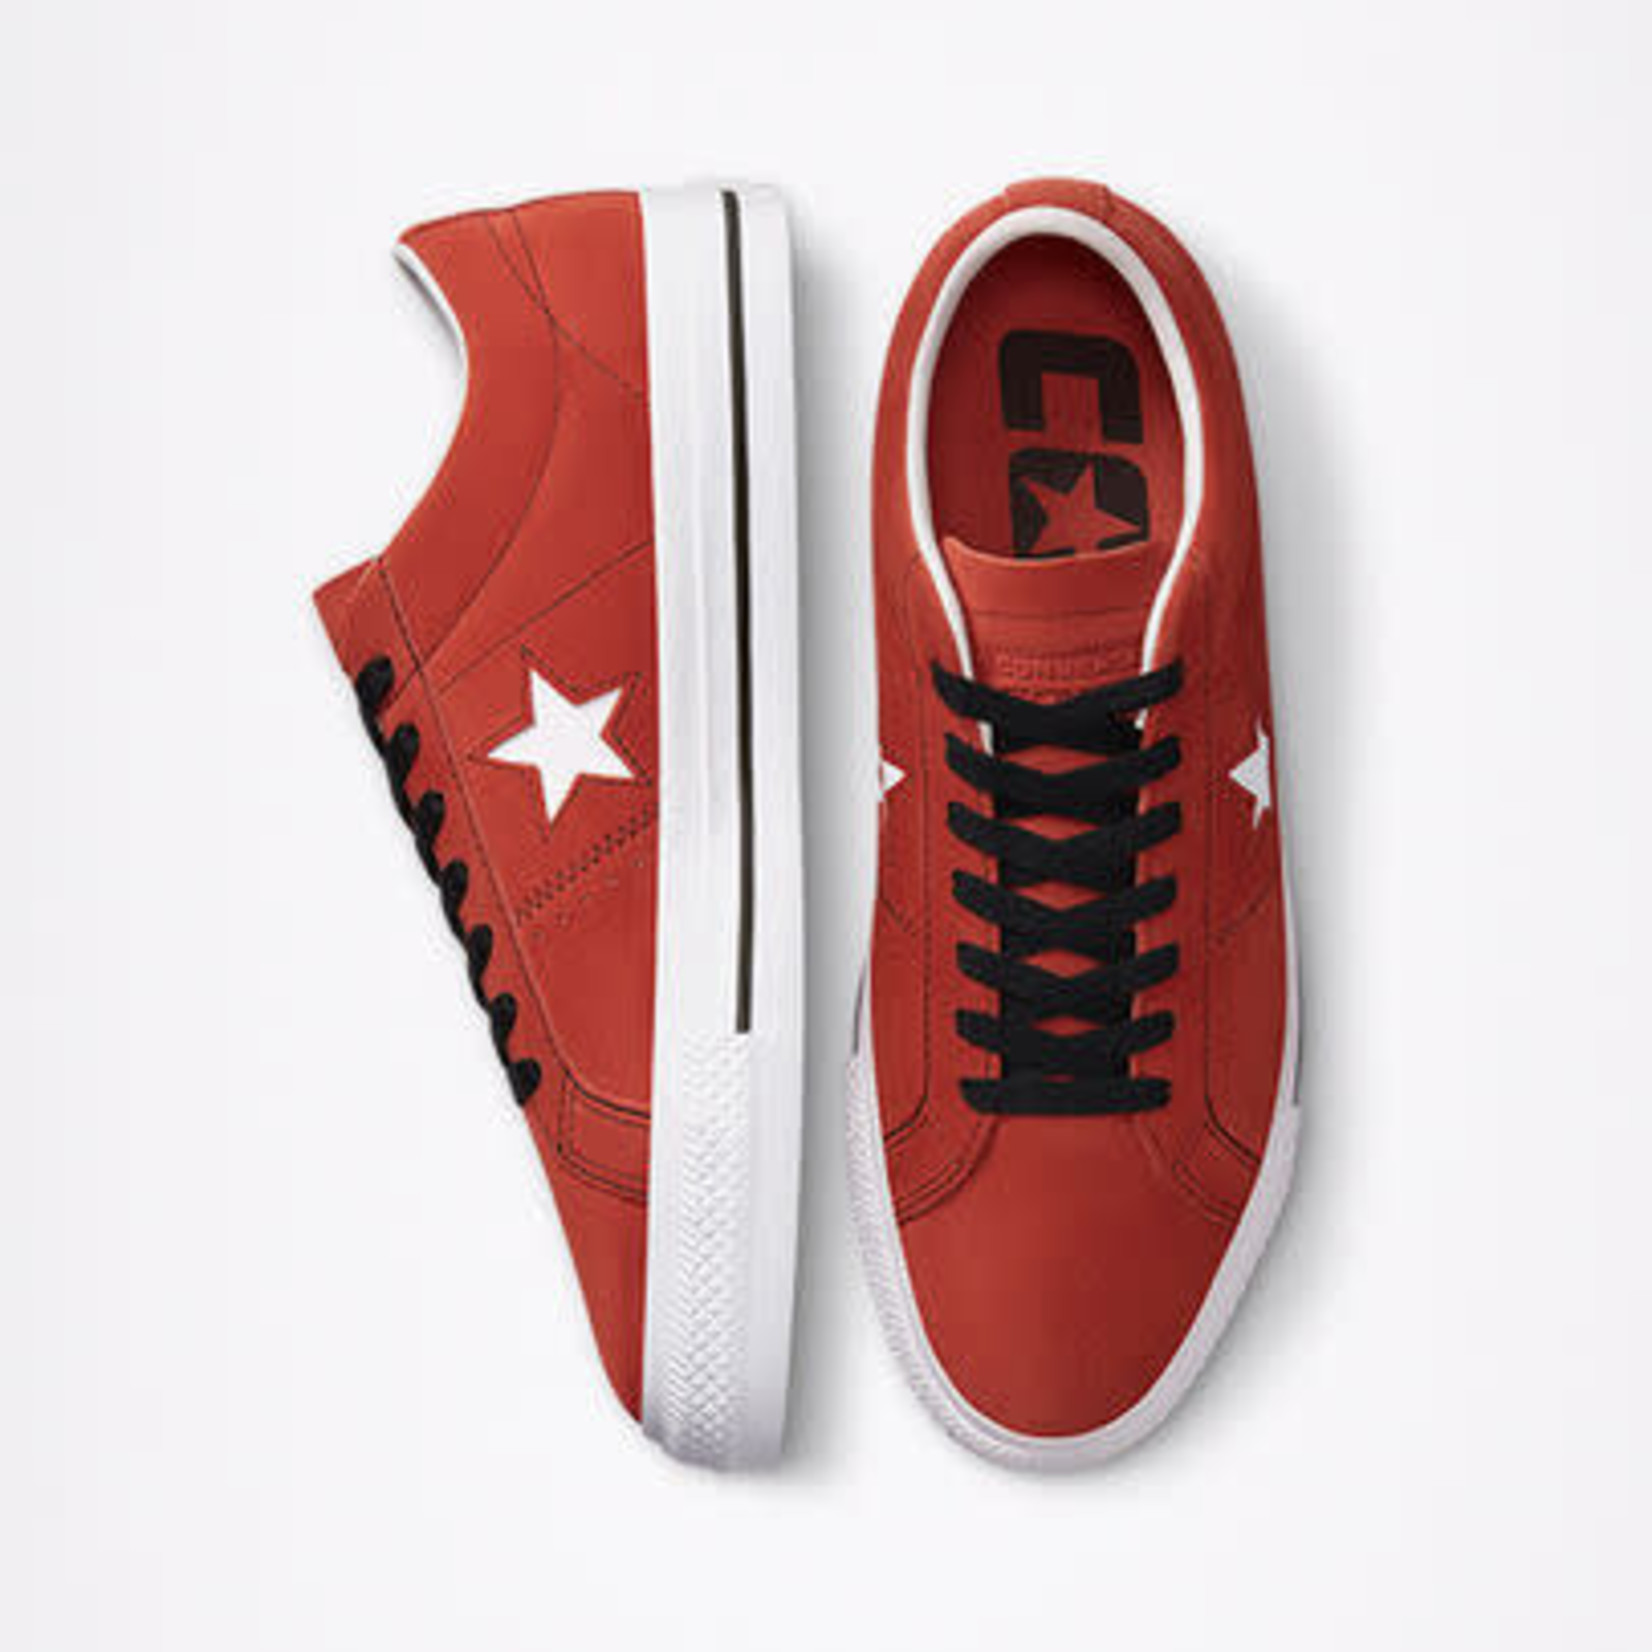 Converse Cons CONS One Star Pro Suede (Fire Opal/Black/White)